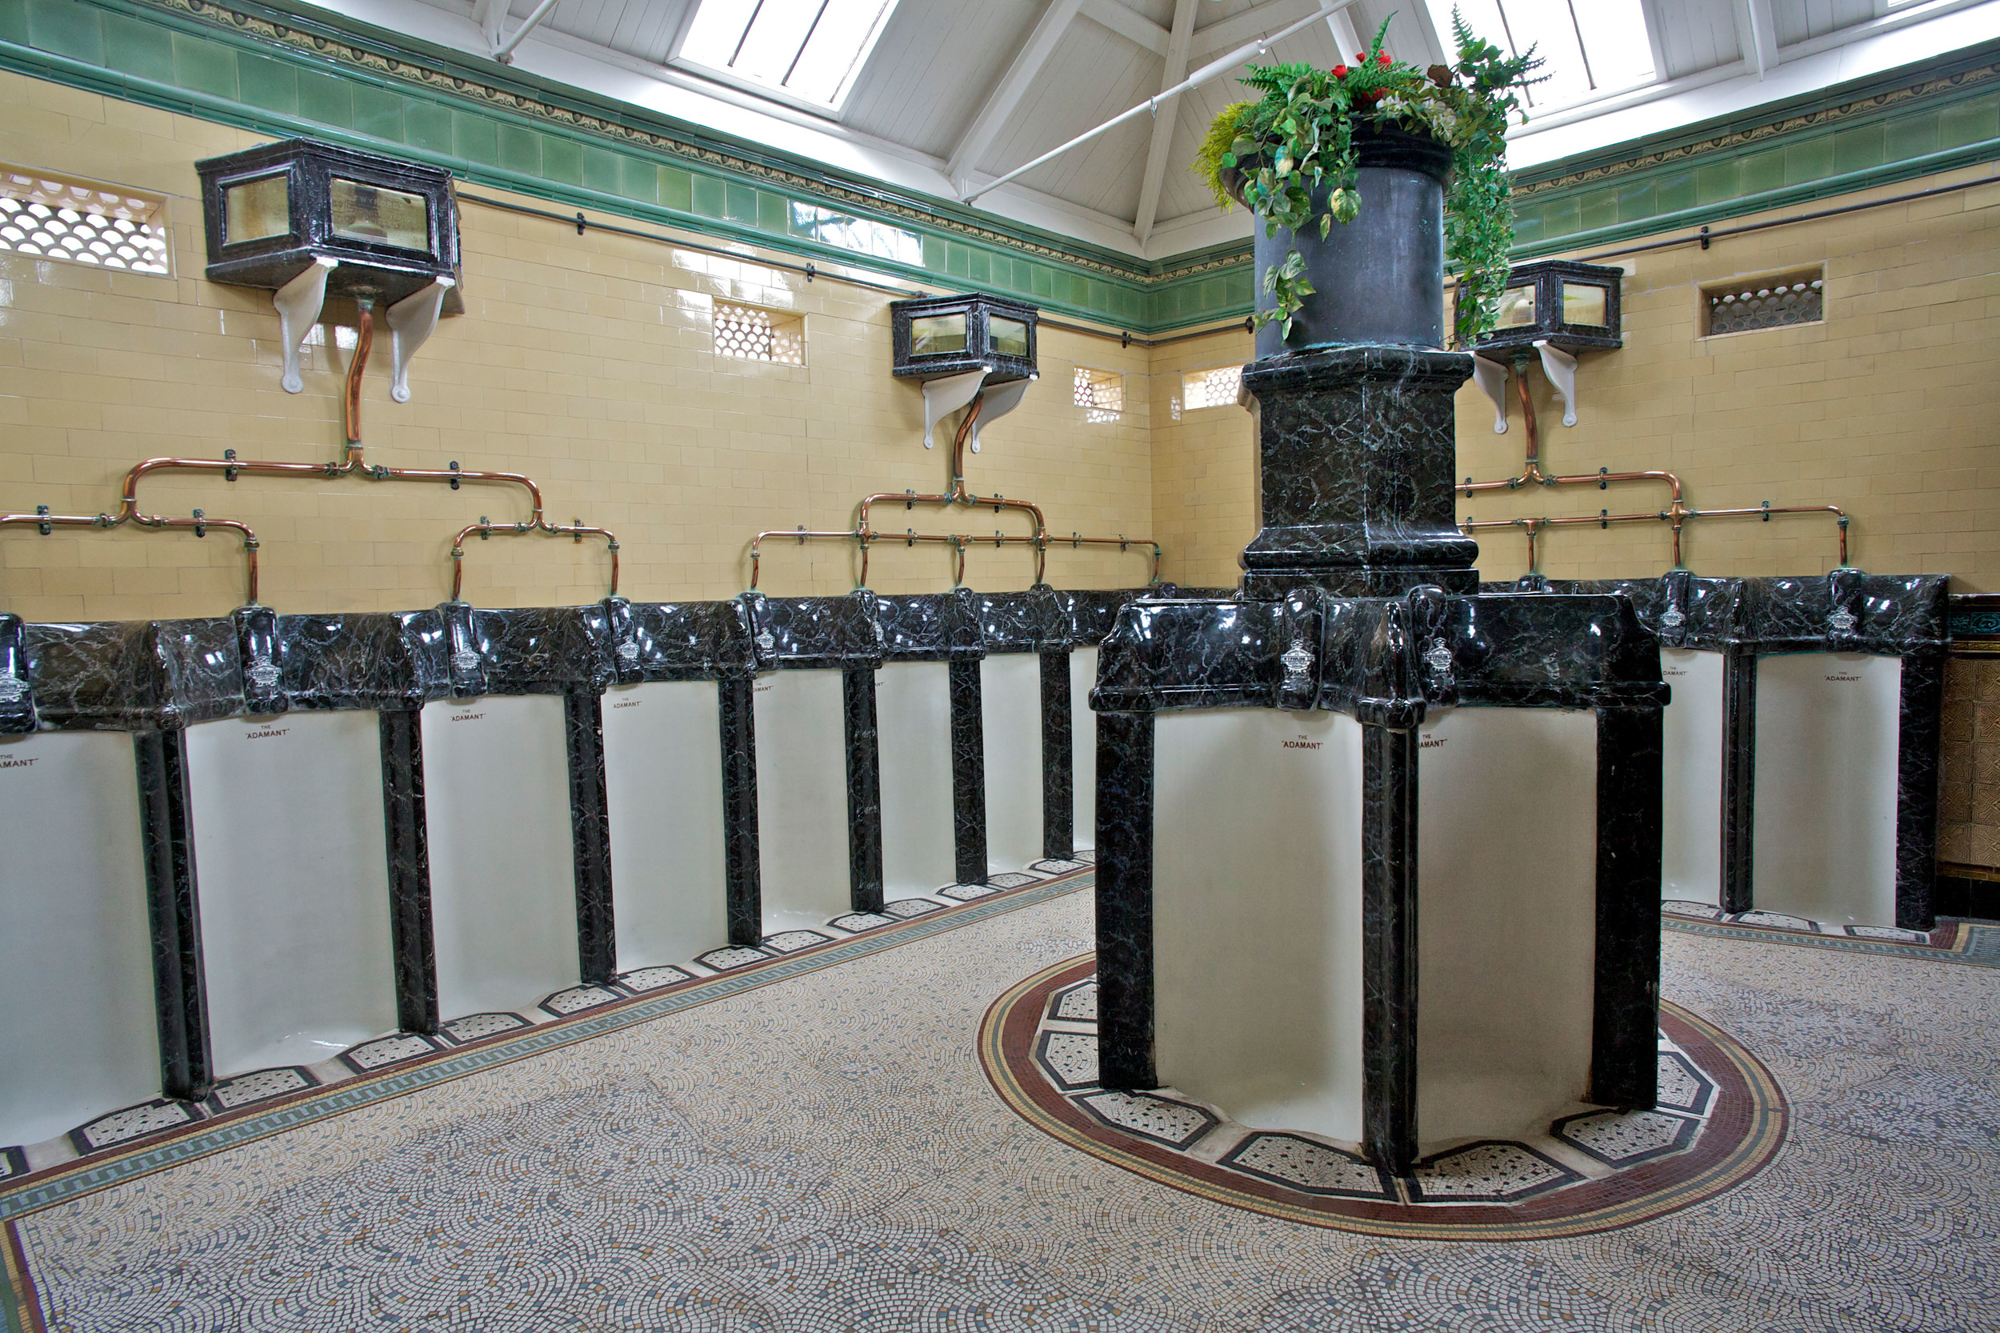 A photograph of a public bathroom with urinals along the walls and around a central pillar with a cascade of green plants on top. The urinals are white with black marble edges. Across the yellow tiled walls, are networks of copper pipes going upwards to black marble boxes. The floor in the photograph is covered in small white, red and blue tiles.   